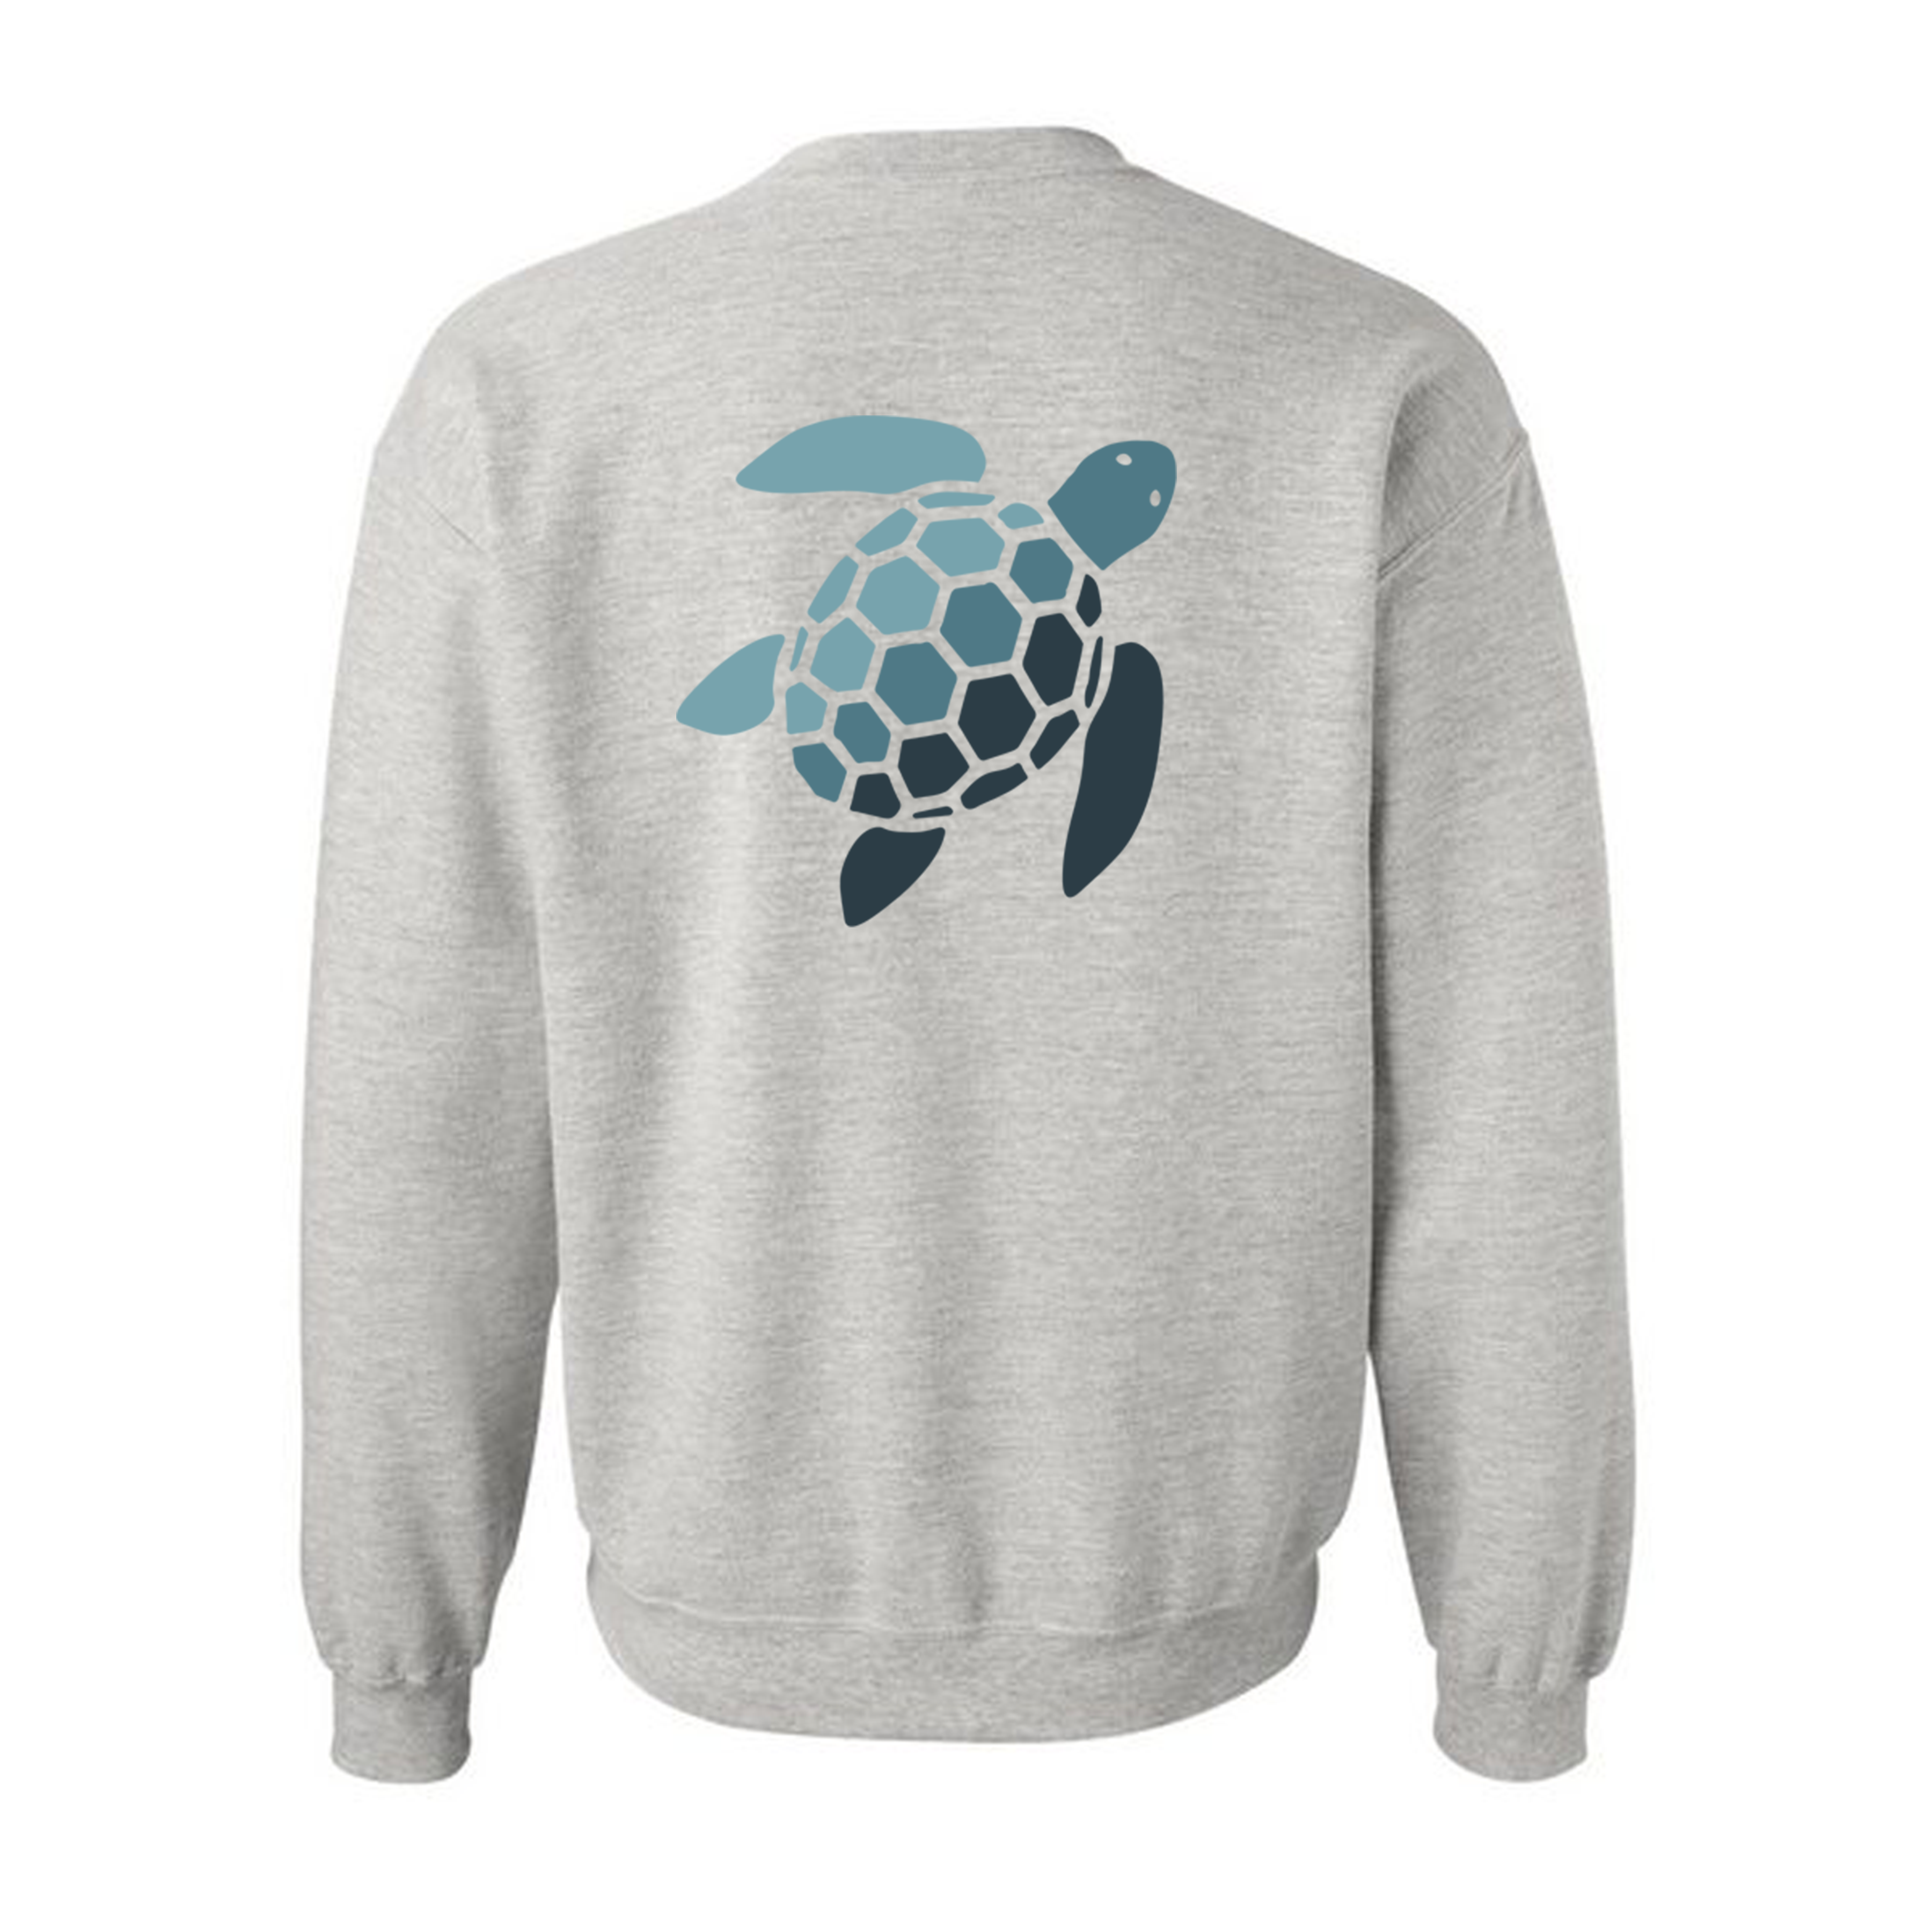 Soft Ash crew neck sweatshirt with Sea Green Apparel navy rectangle logo on front center and blue gradient Sea Green Apparel turtle logo on center back 8-ounce, 50/50 cotton/poly Double-needle stitching at waistband and cuffs 1x1 rib knit collar, cuffs and waistband with spandex